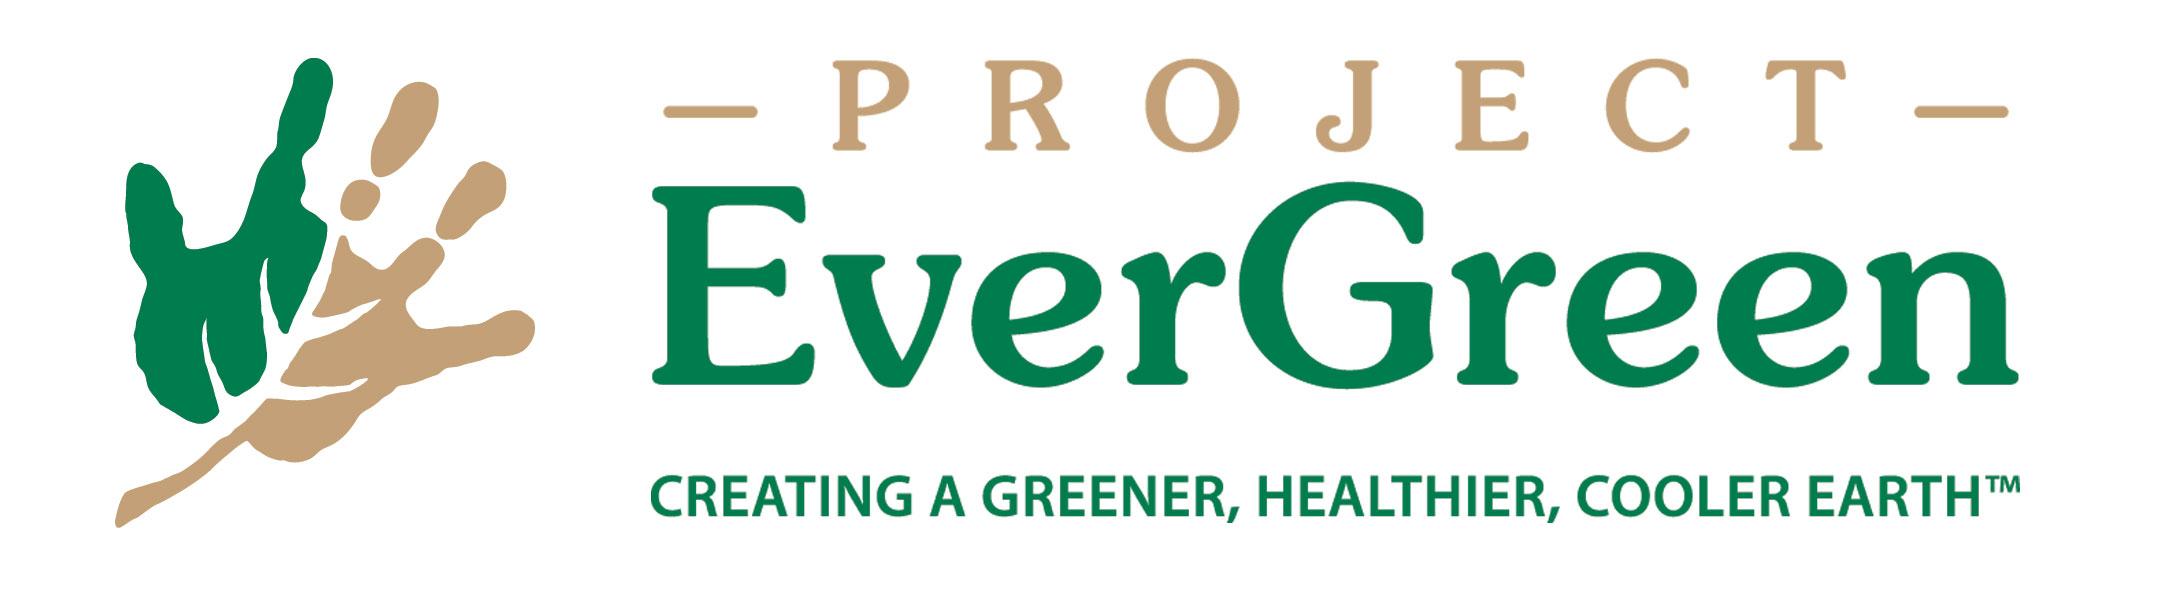 Green Space Logo - Environmental Benefits of Green Space – Project Evergreen